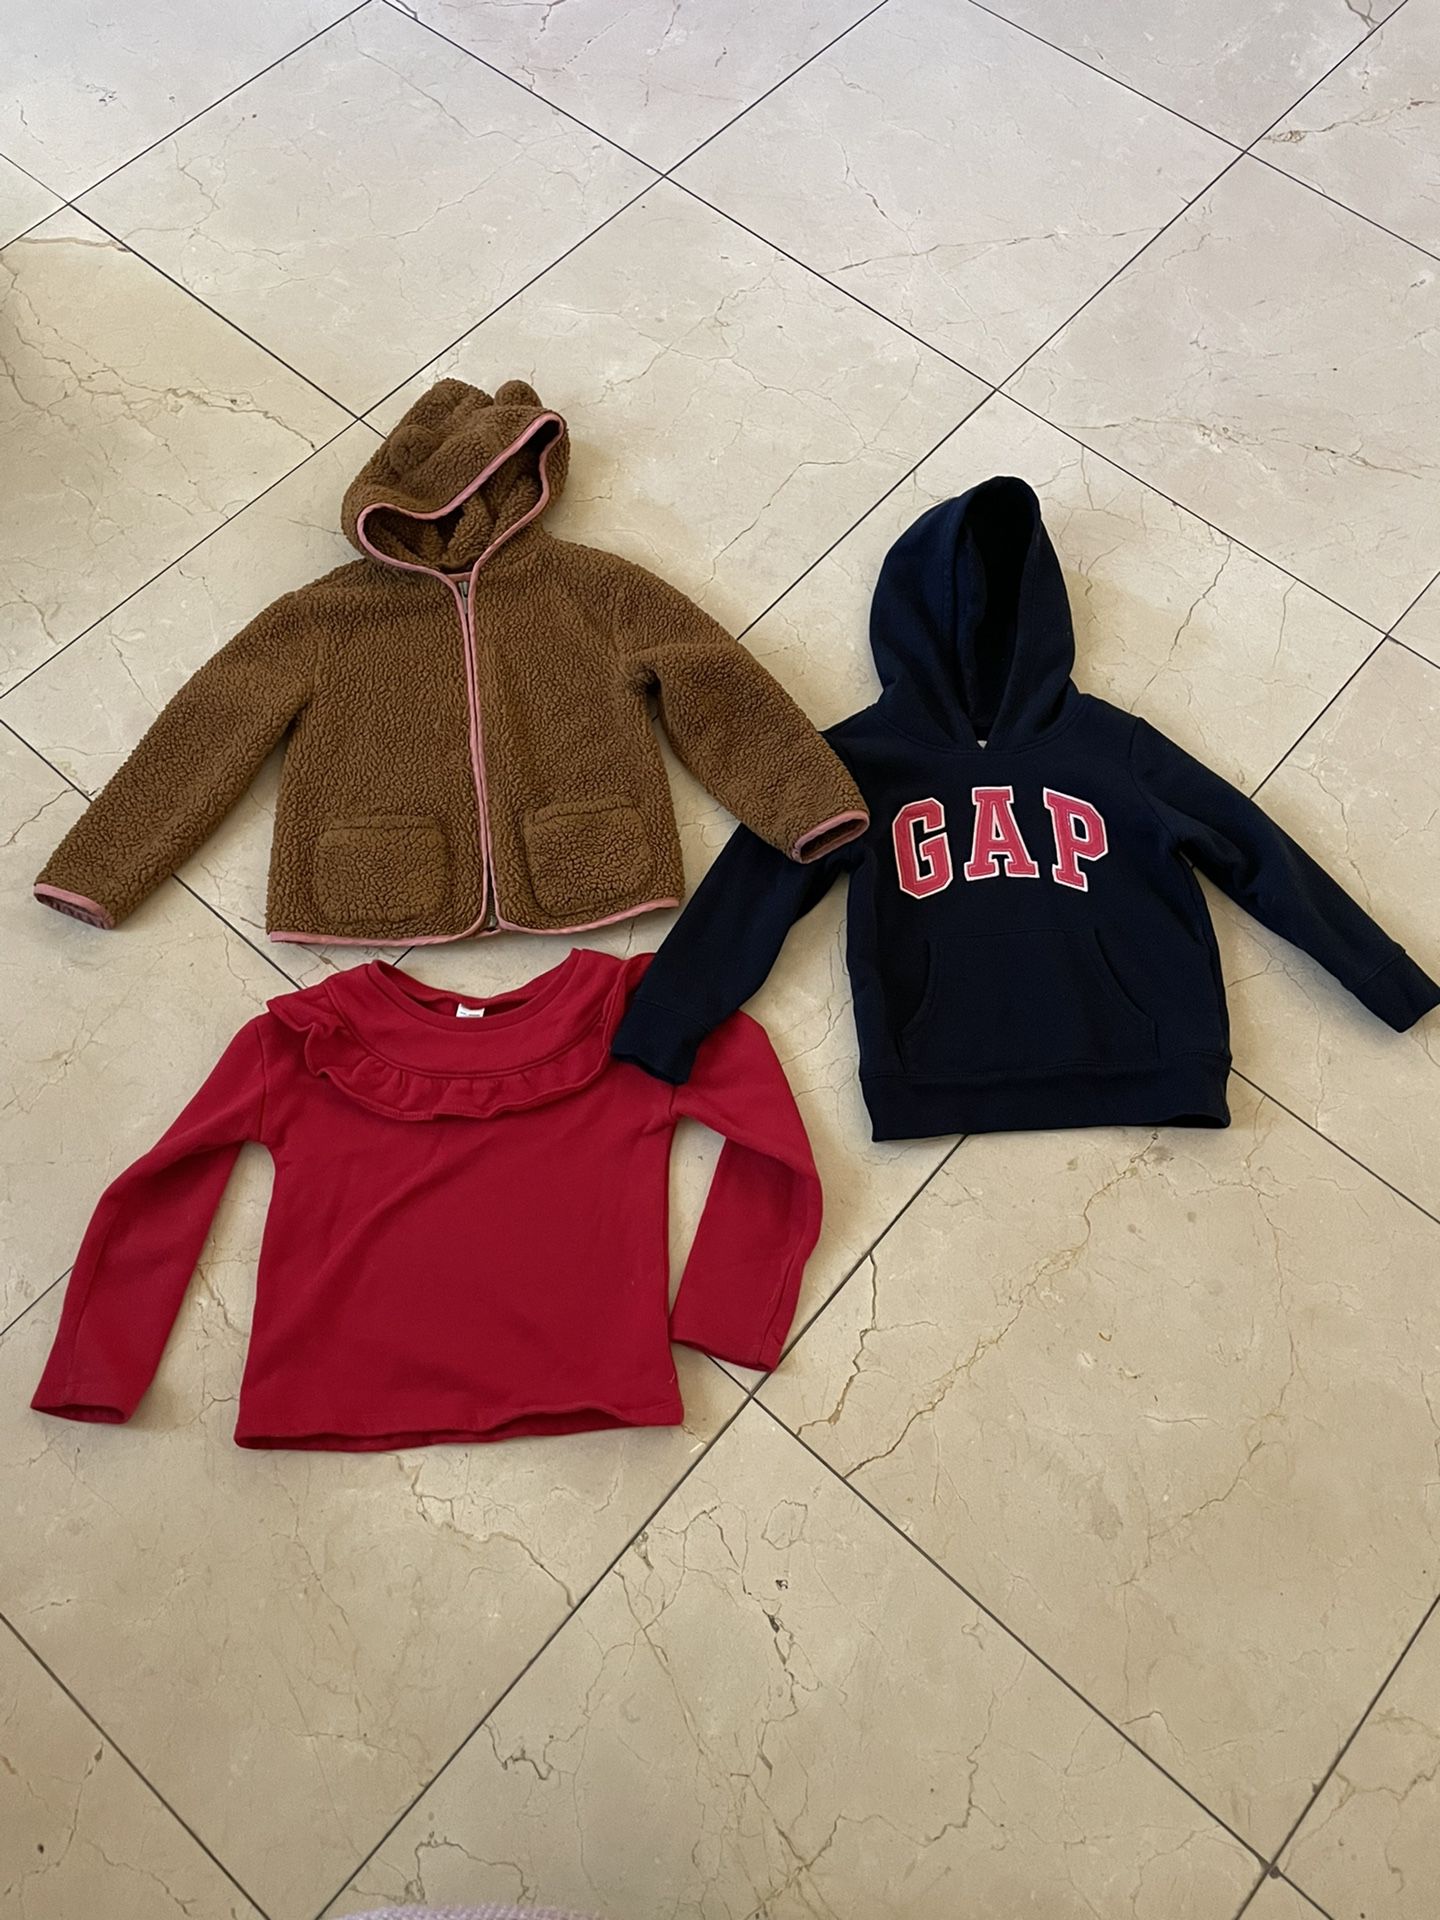 4 And 5T Sweater Bundle Lot For Girls 